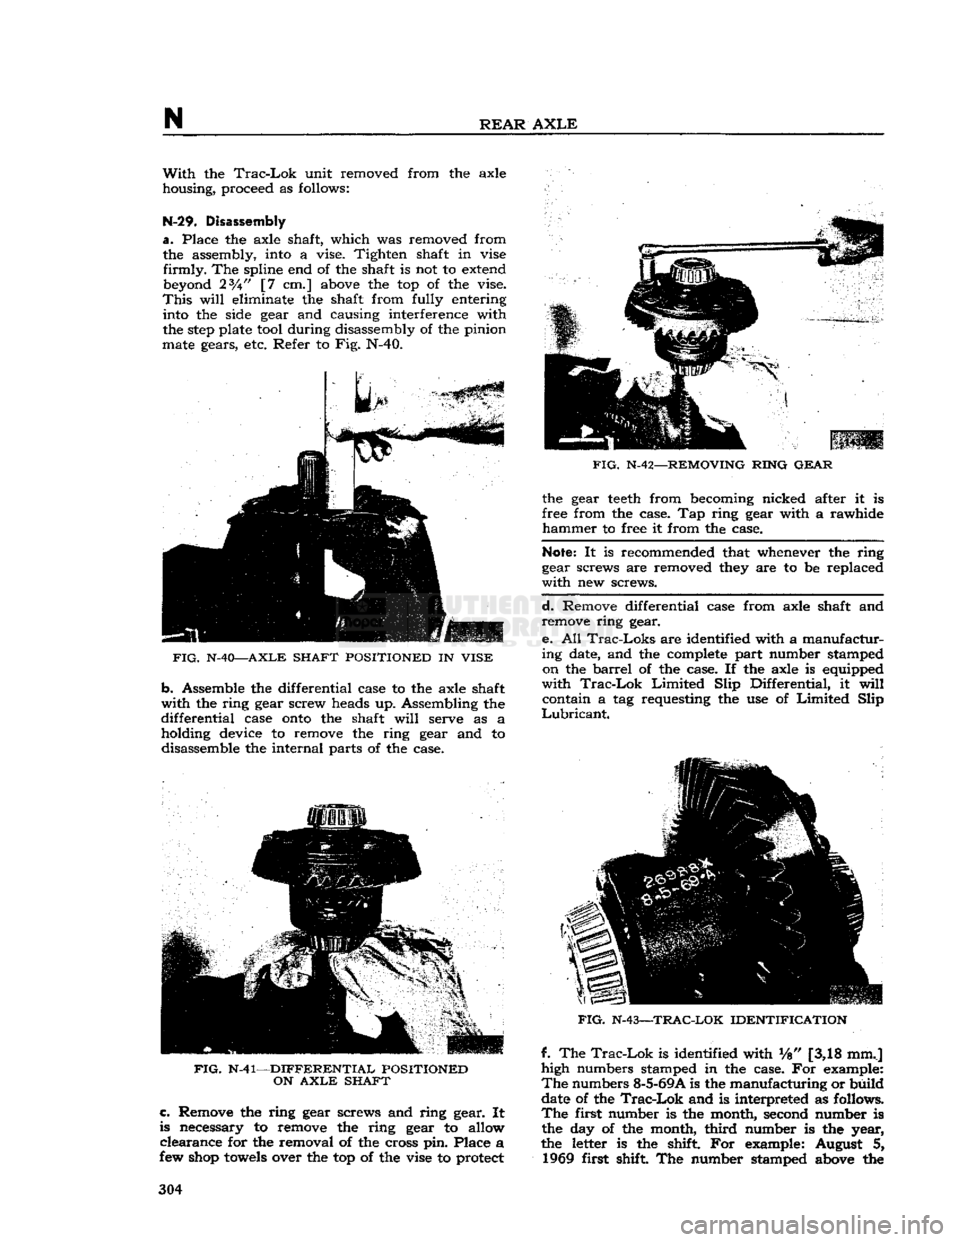 JEEP DJ 1953  Service Manual 
N 

REAR
 AXLE 
With
 the
 Trac-Lok
 unit removed from the axle 
housing, proceed as follows: 

N-29.
 Disassembly 

a.
 Place the axle shaft, which was removed from  the assembly, into a vise. Tight